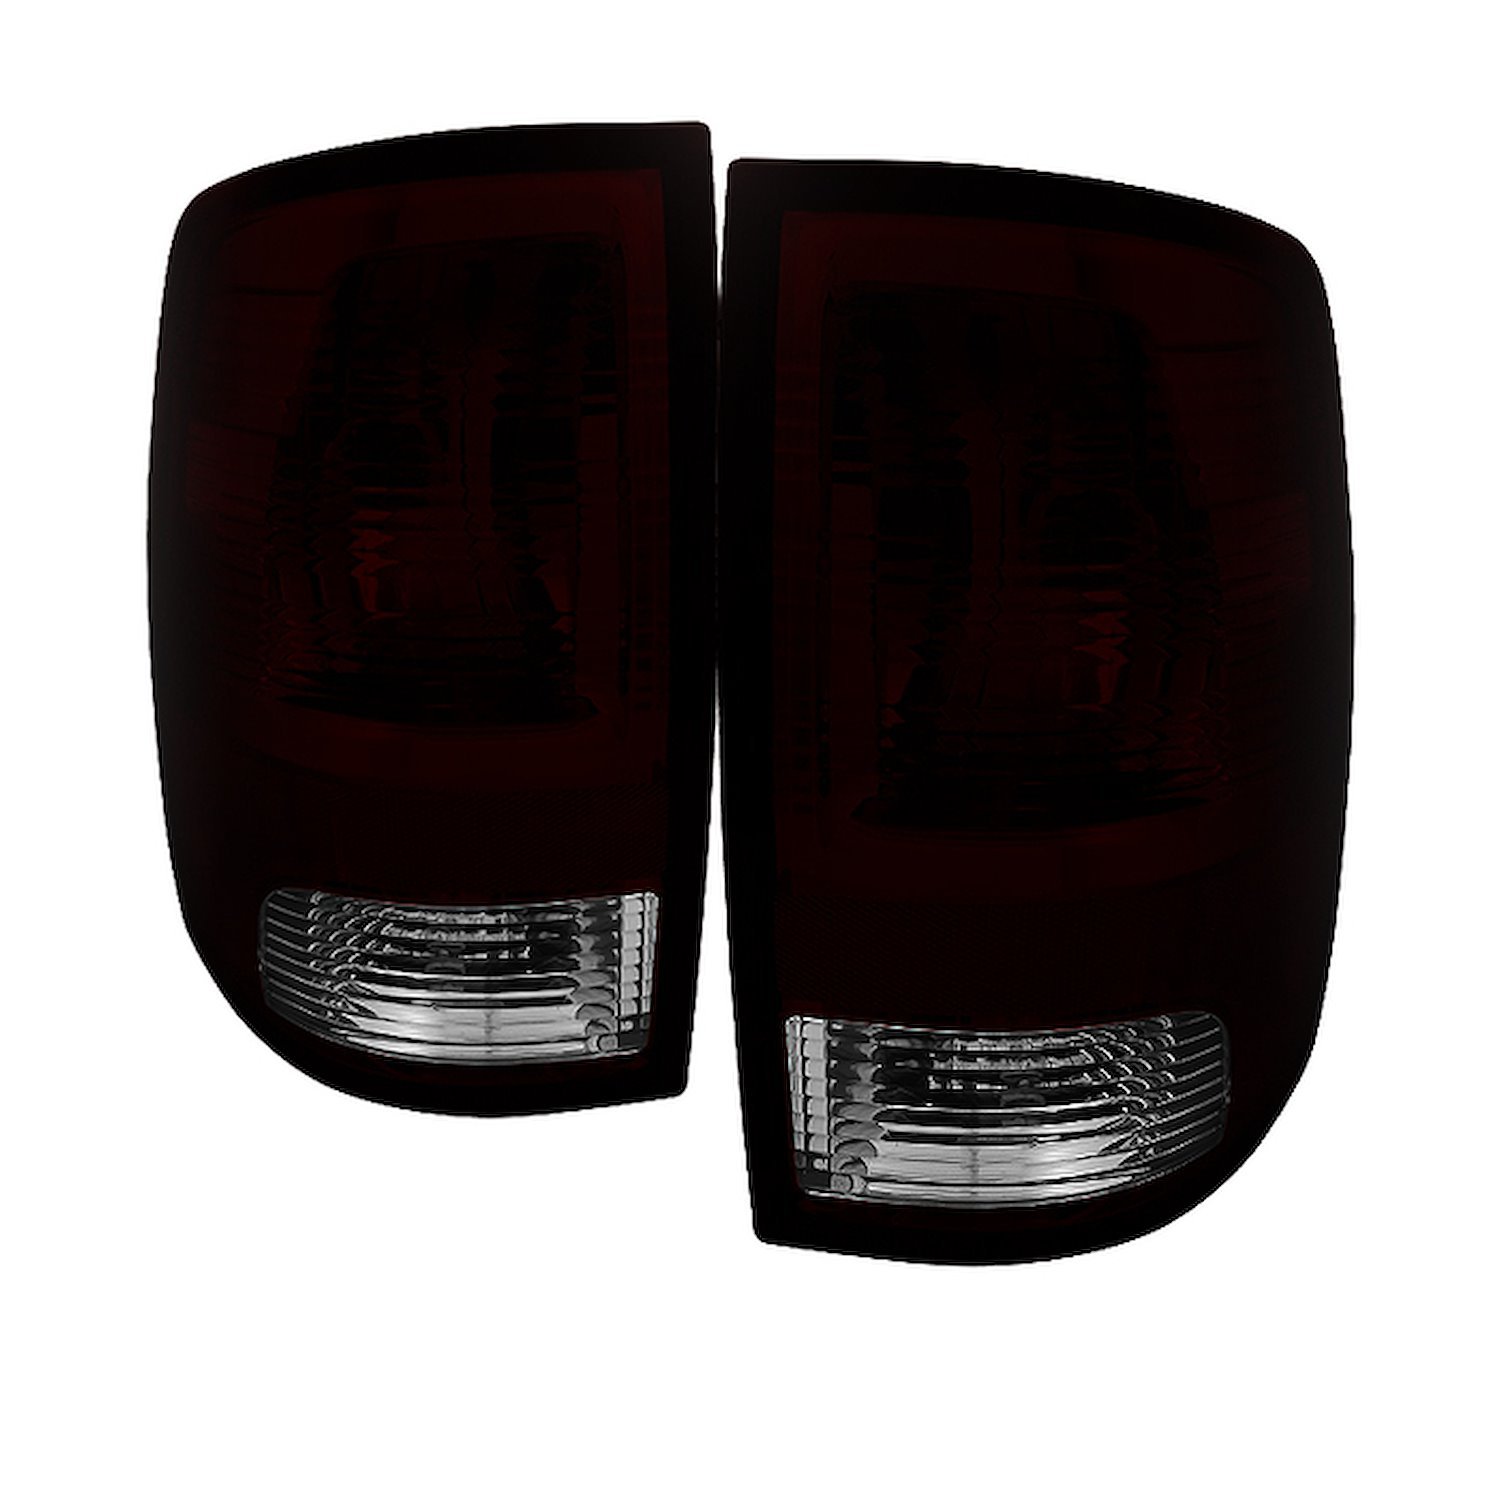 xTune OEM Style Tail Lights 2009-2018 Dodge Ram